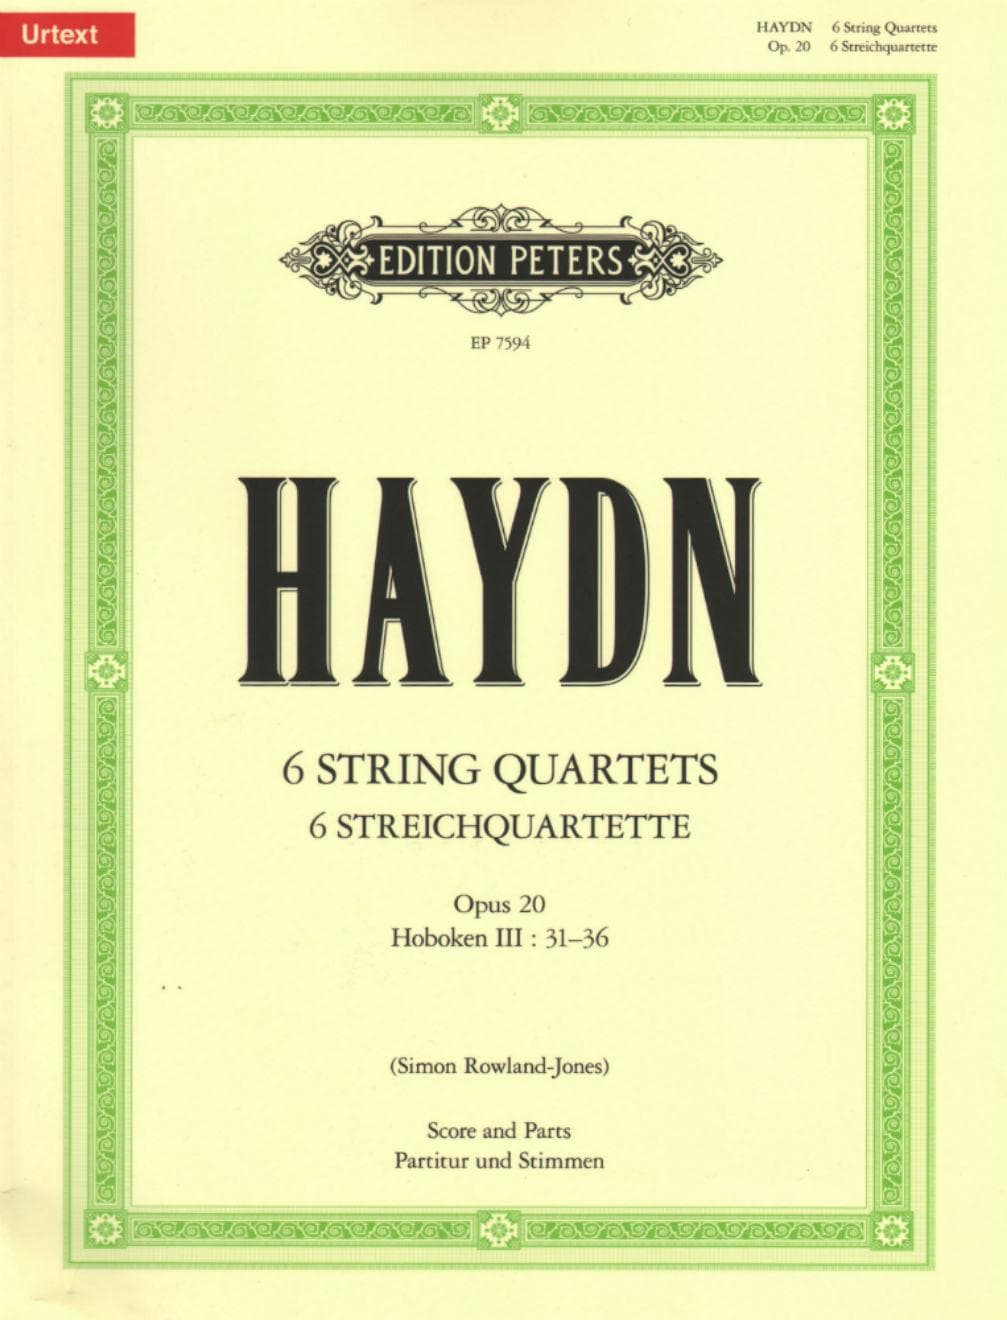 Haydn, Franz Joseph - 6 String Quartets, Op 20 - Two Violins, Viola, and Cello - Score and Parts - edited by Simon Rowland-Jones - Edition Peters URTEXT